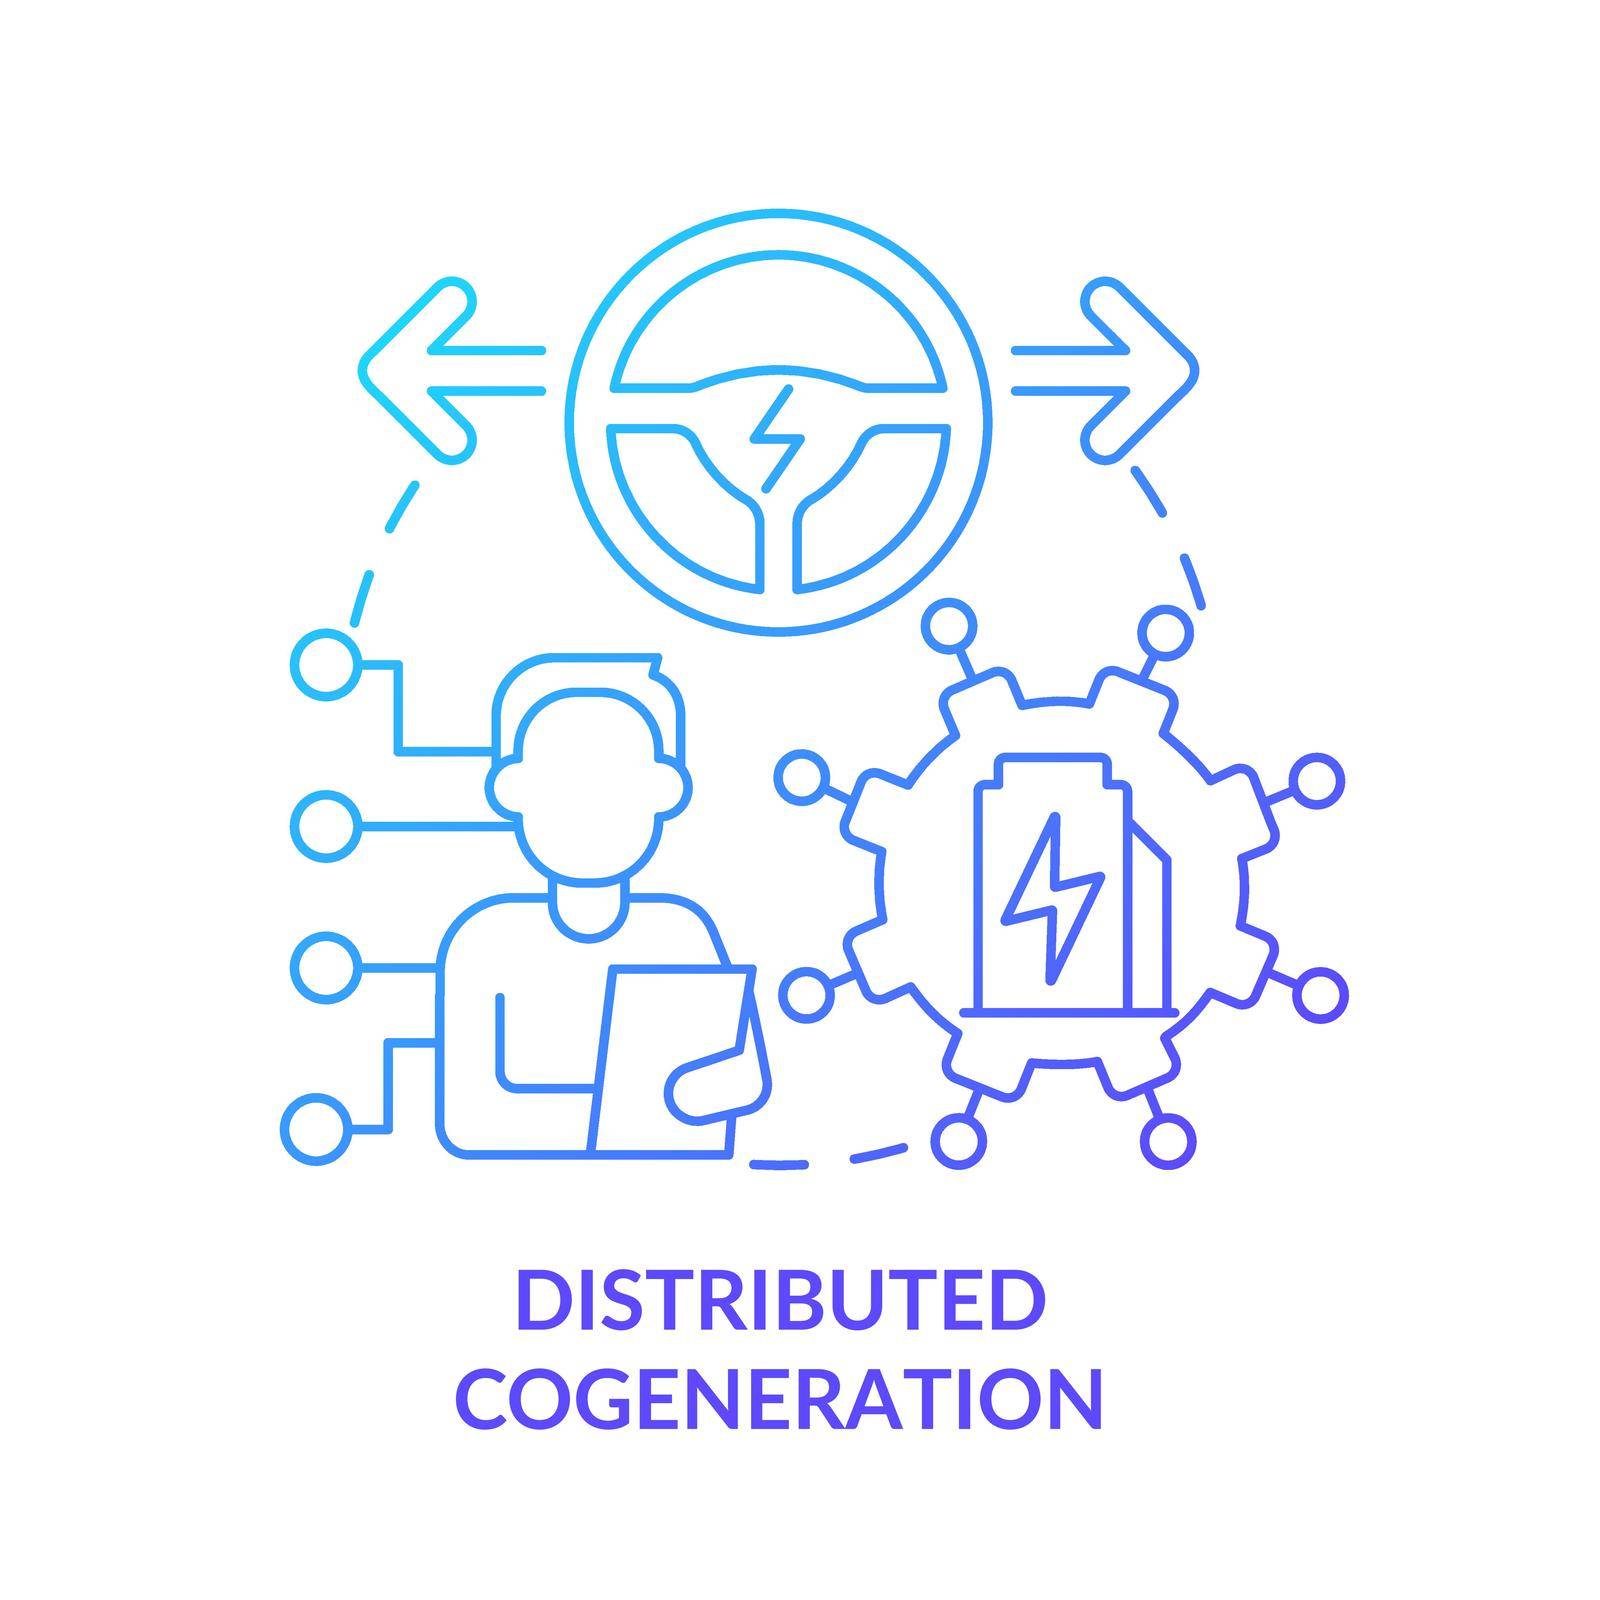 Distributed cogeneration blue gradient concept icon by bsd studio